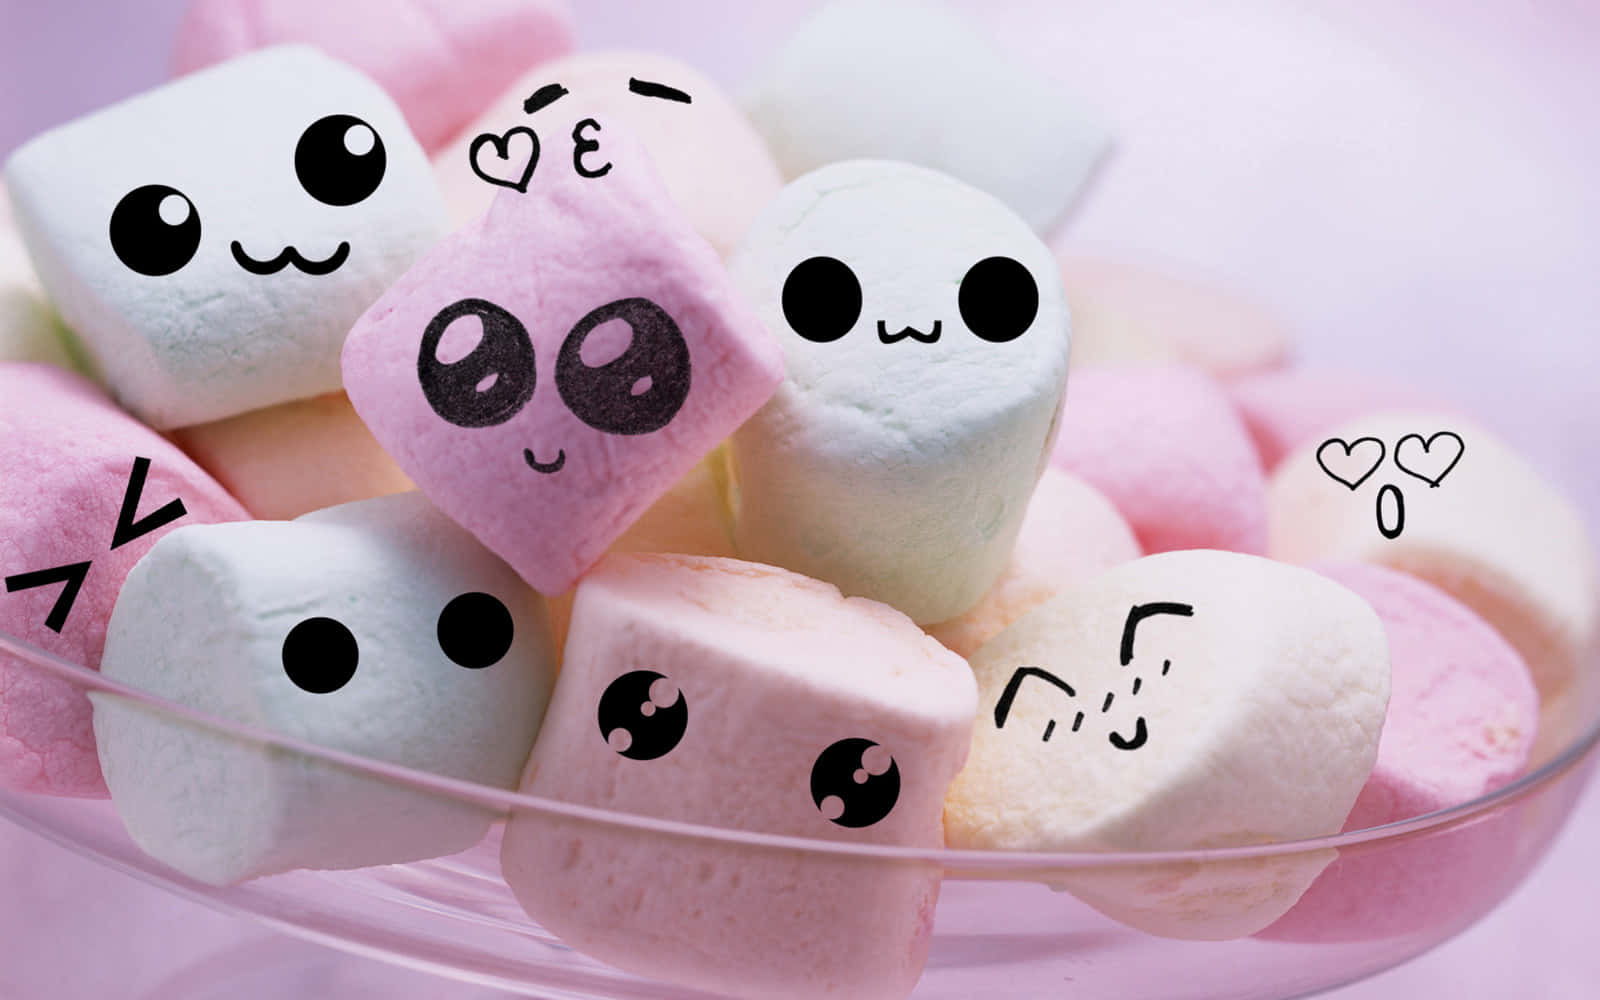 A Bowl Of Marshmallows With Cute Faces On Them